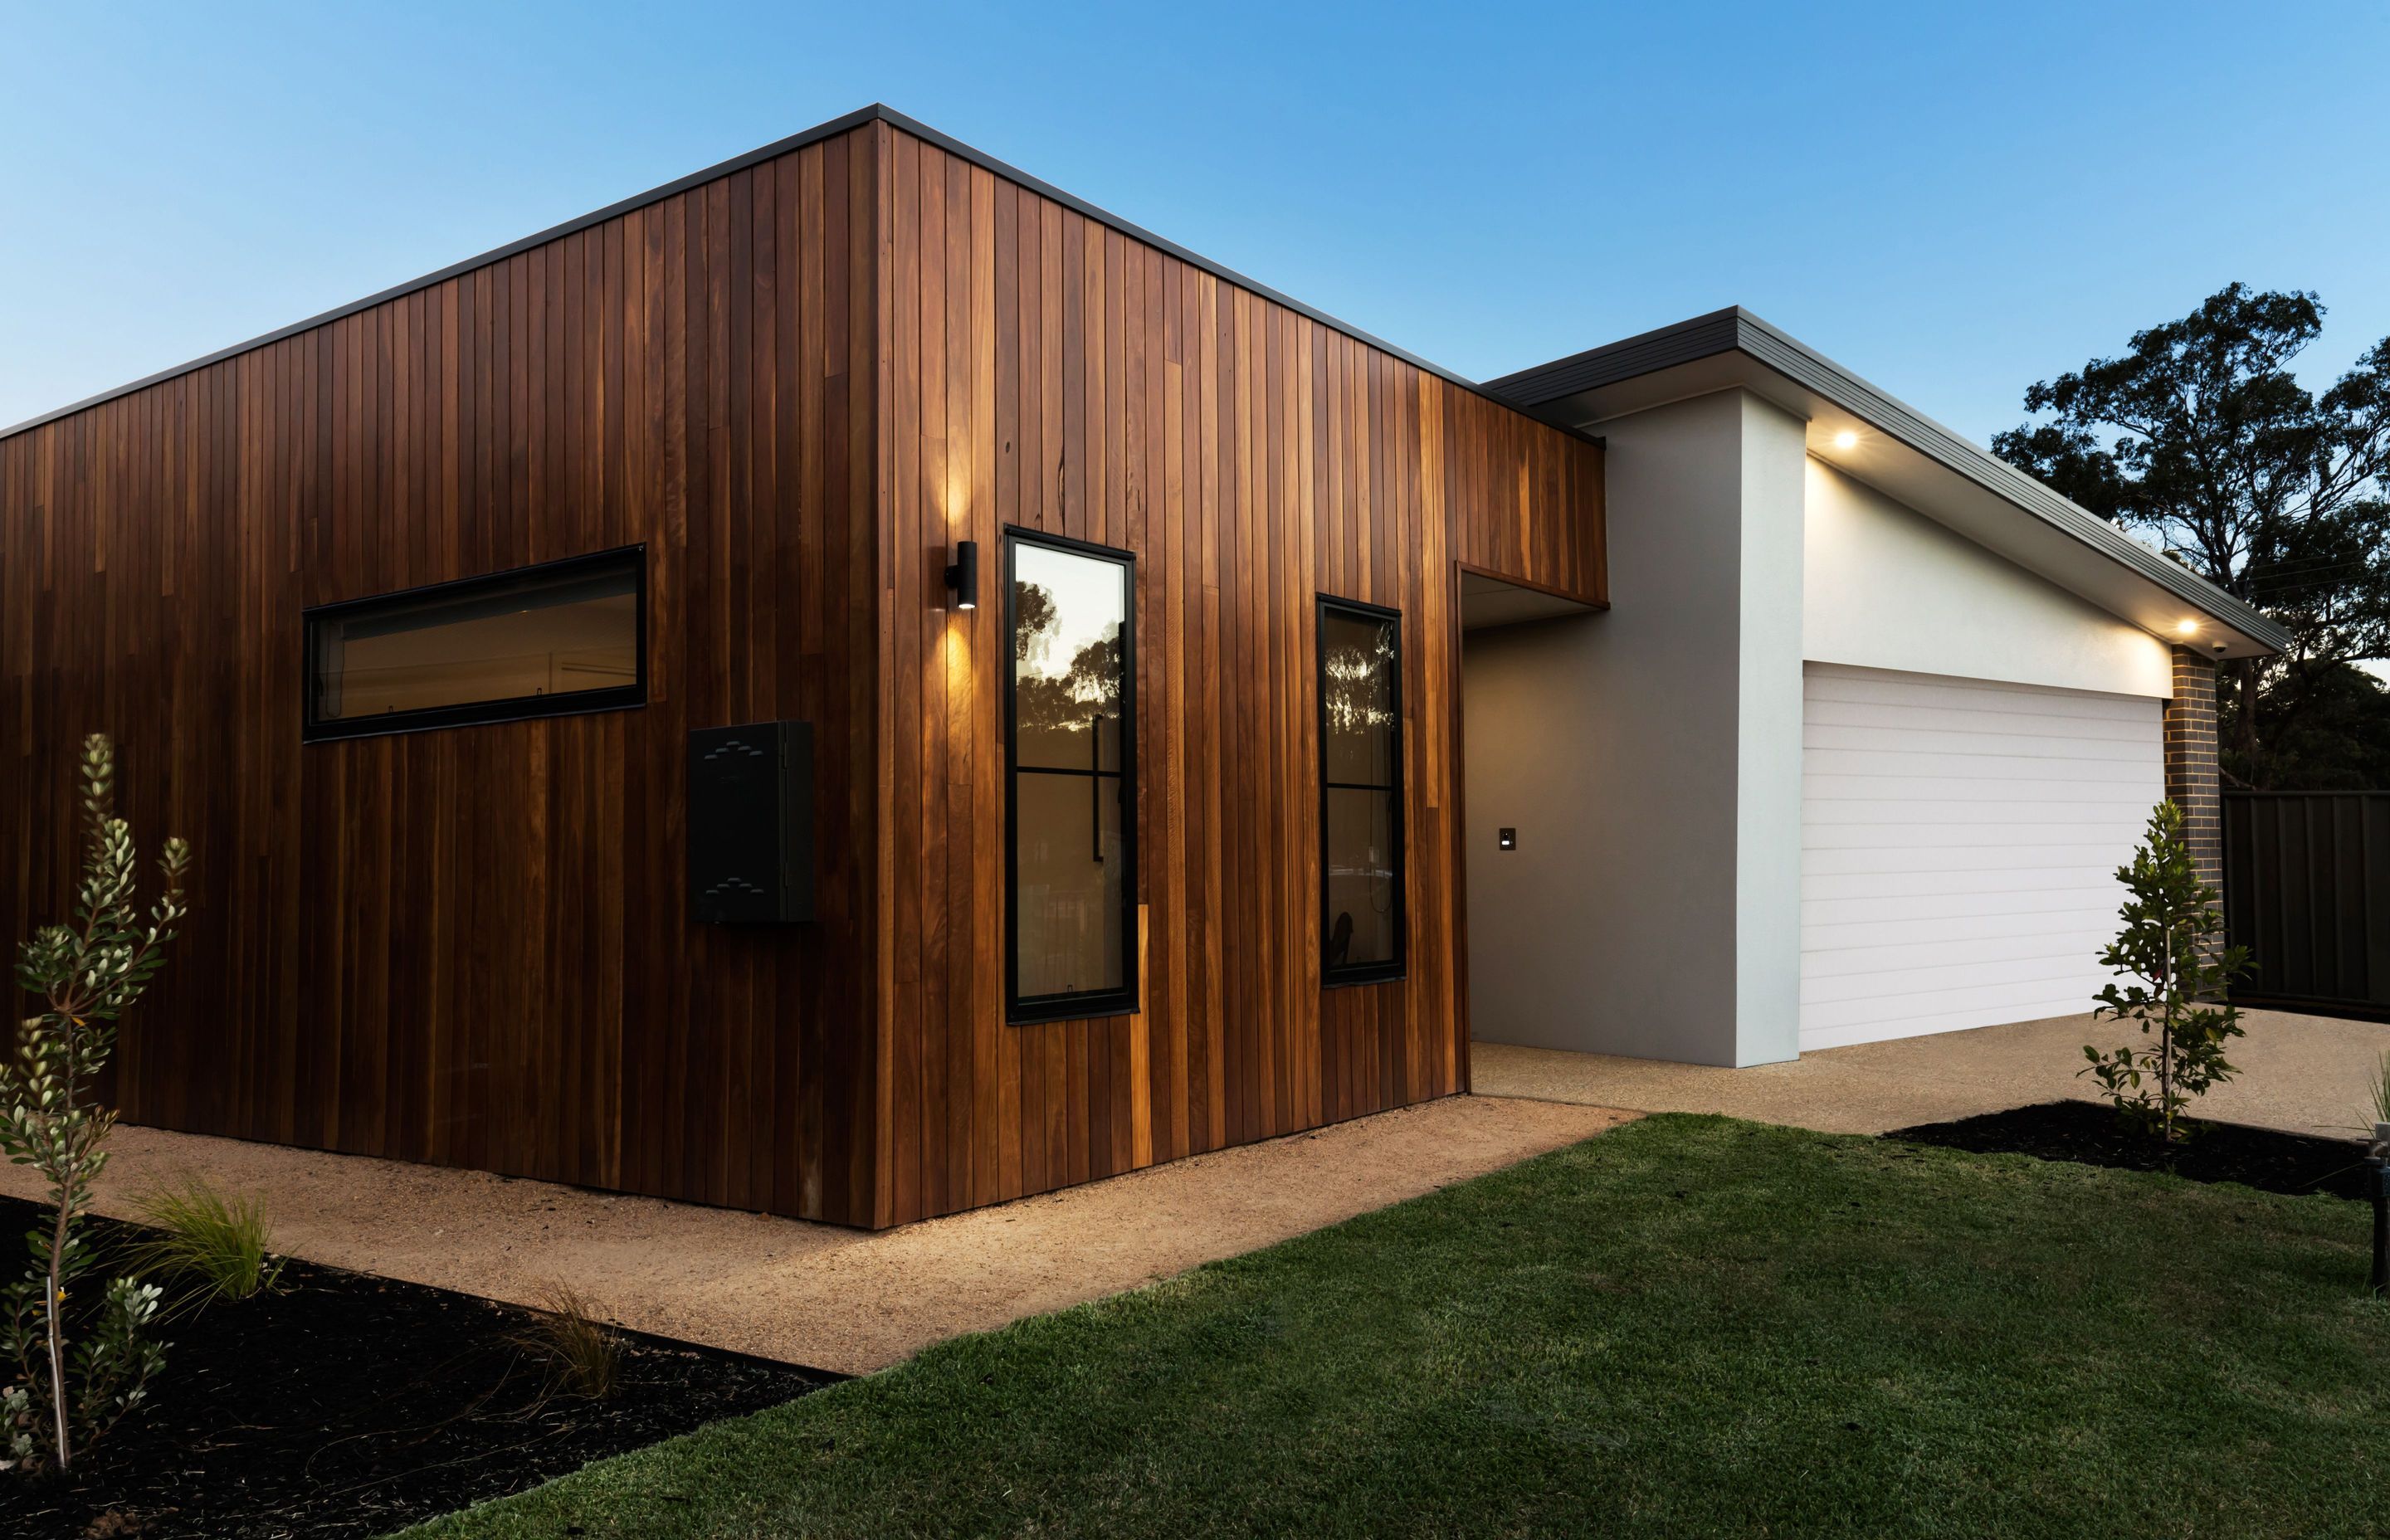 The Most Cost-effective Cladding Options in Australia